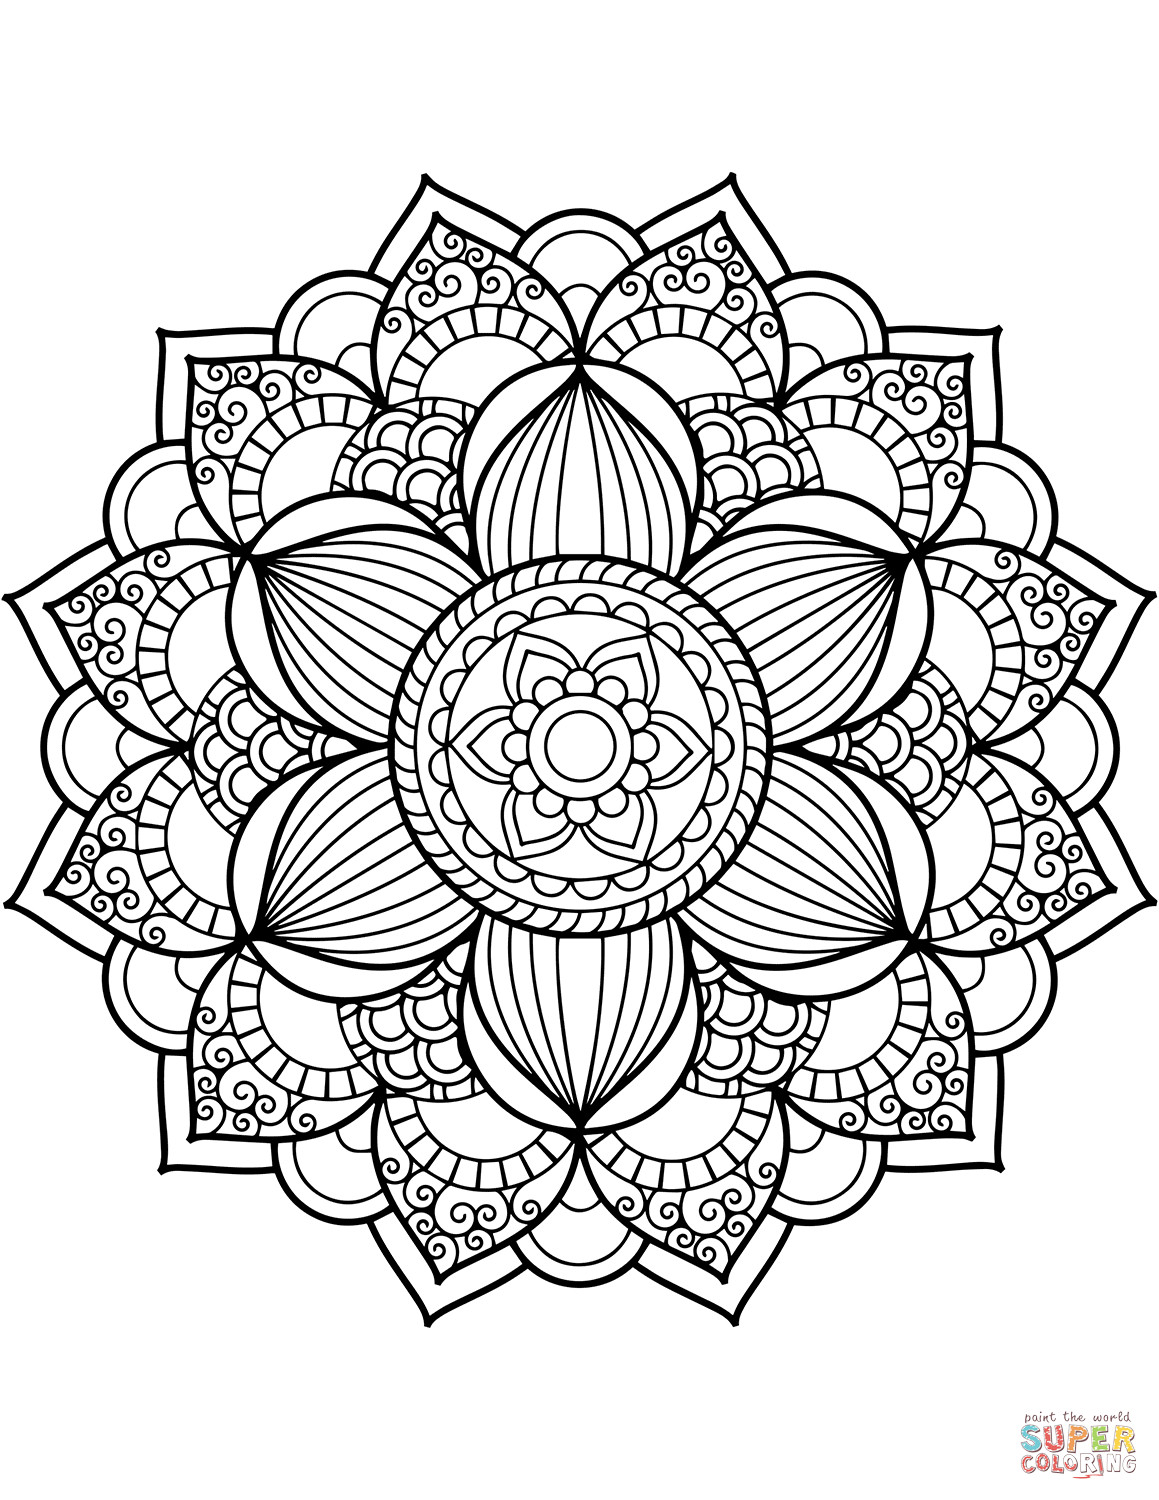 Coloring Pages For Girls Flower Mandala
 Flower Mandala coloring page